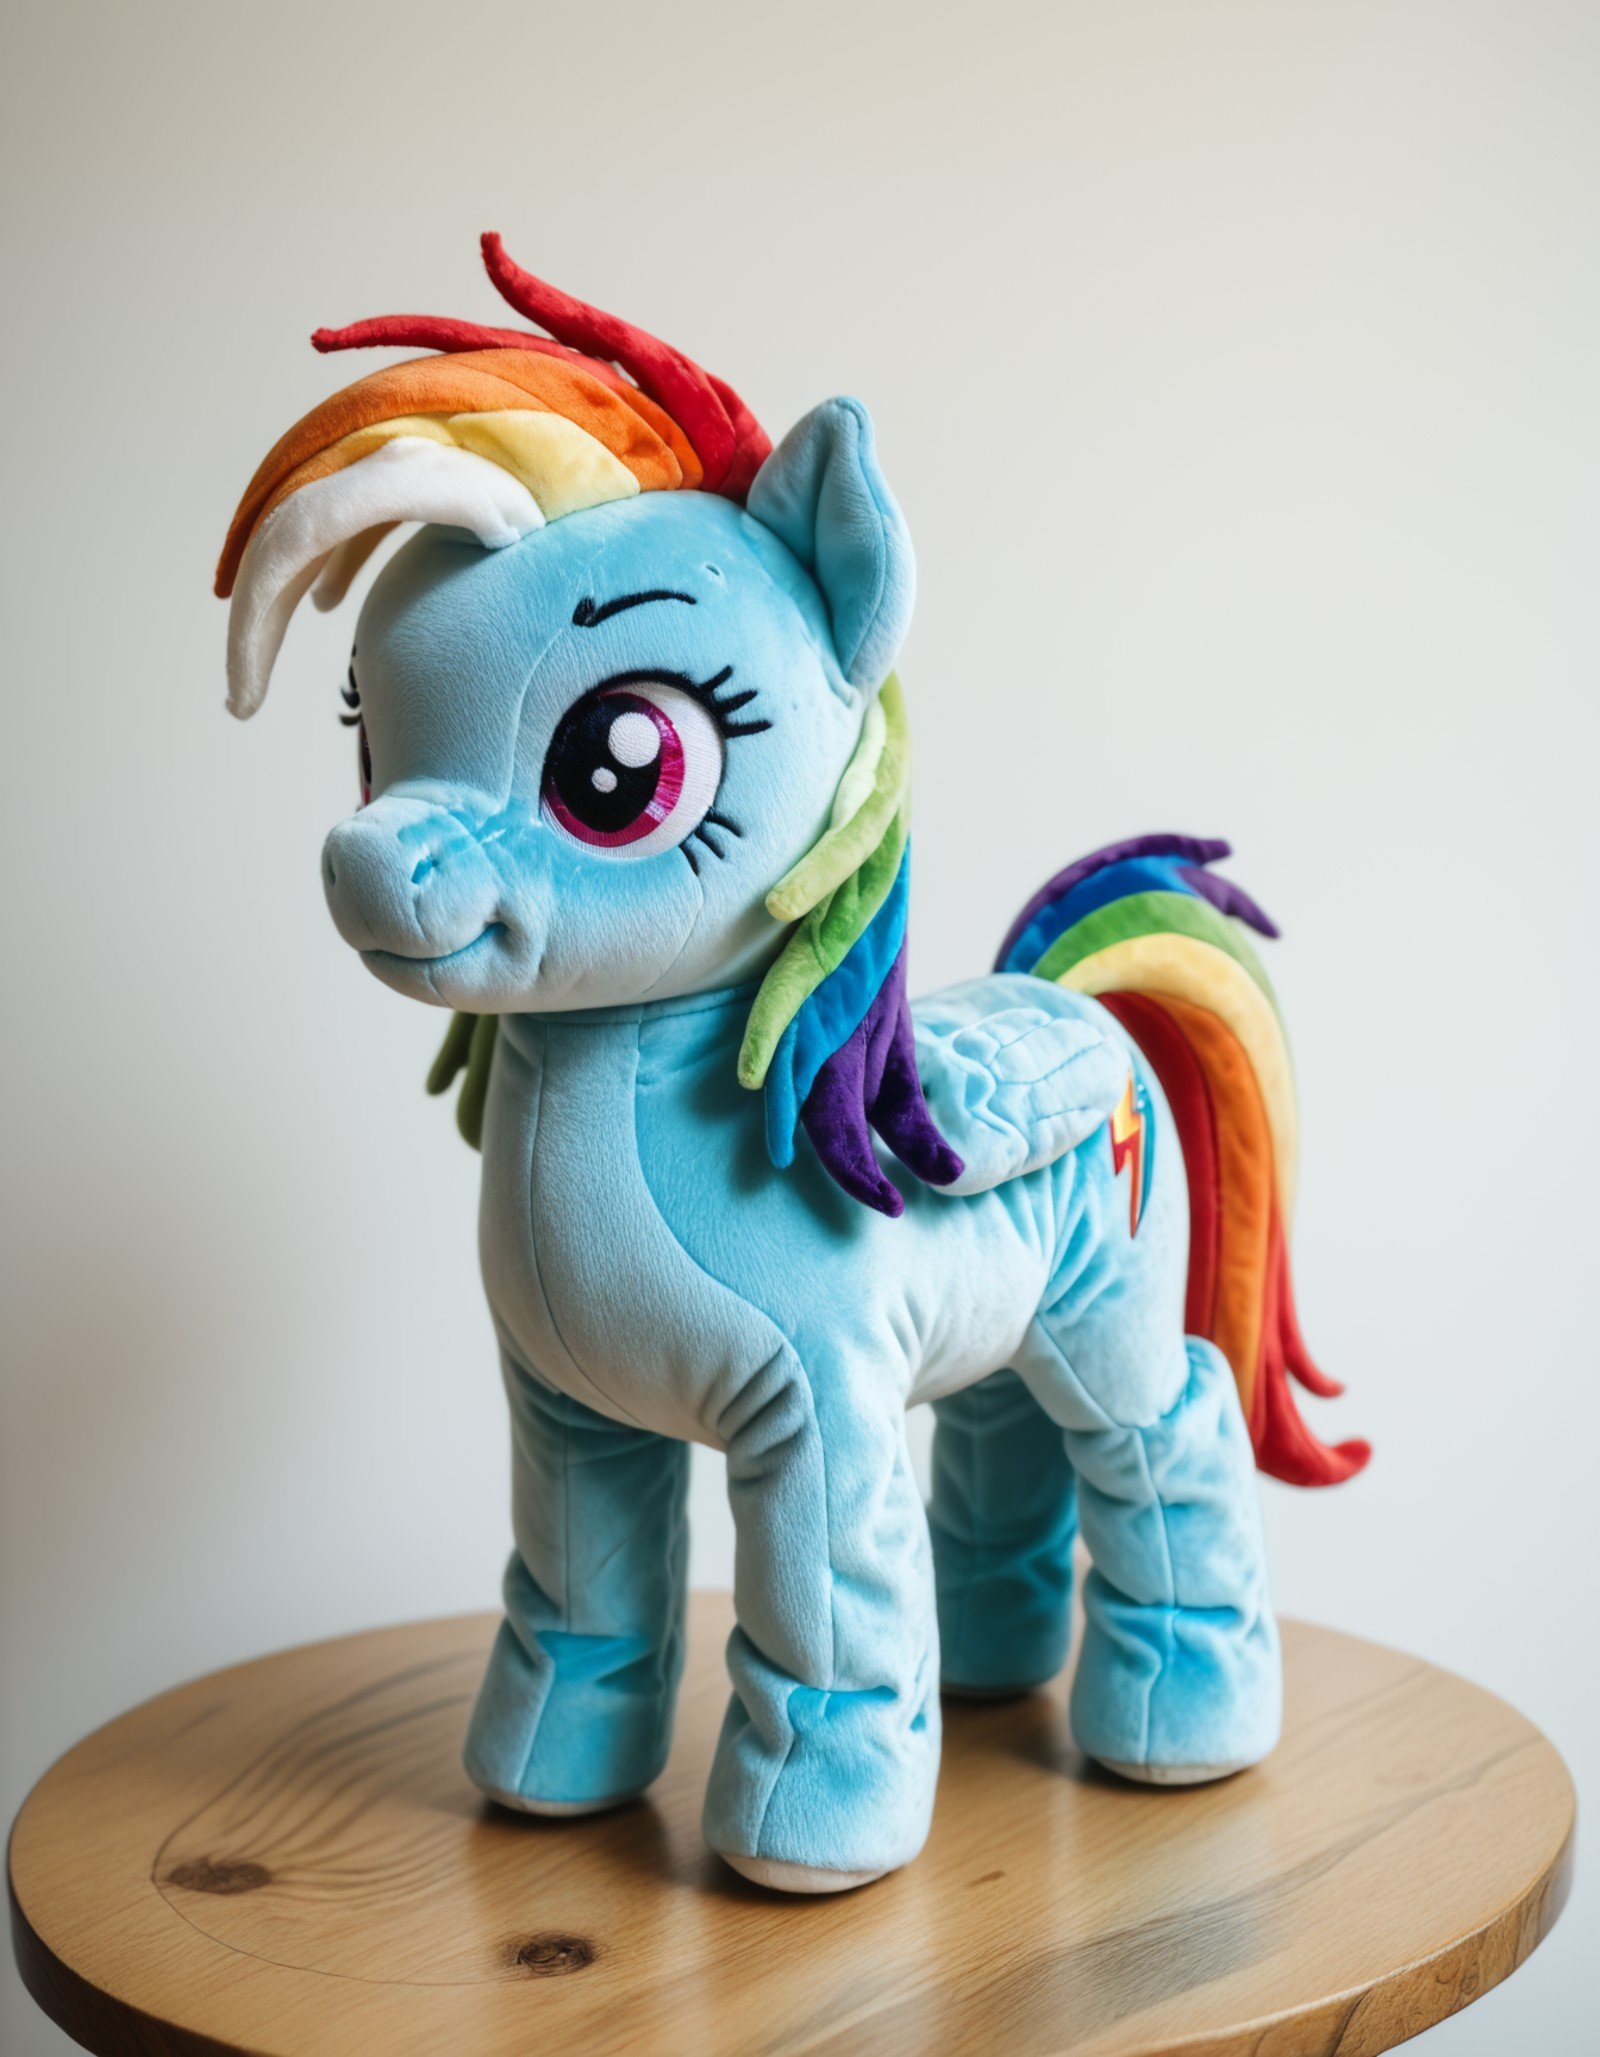 score_9, score_8_up, score_7_up, score_6_up, score_5_up, score_4_up, score_9, a photo of rainbow dash pony plushie standing on a real table